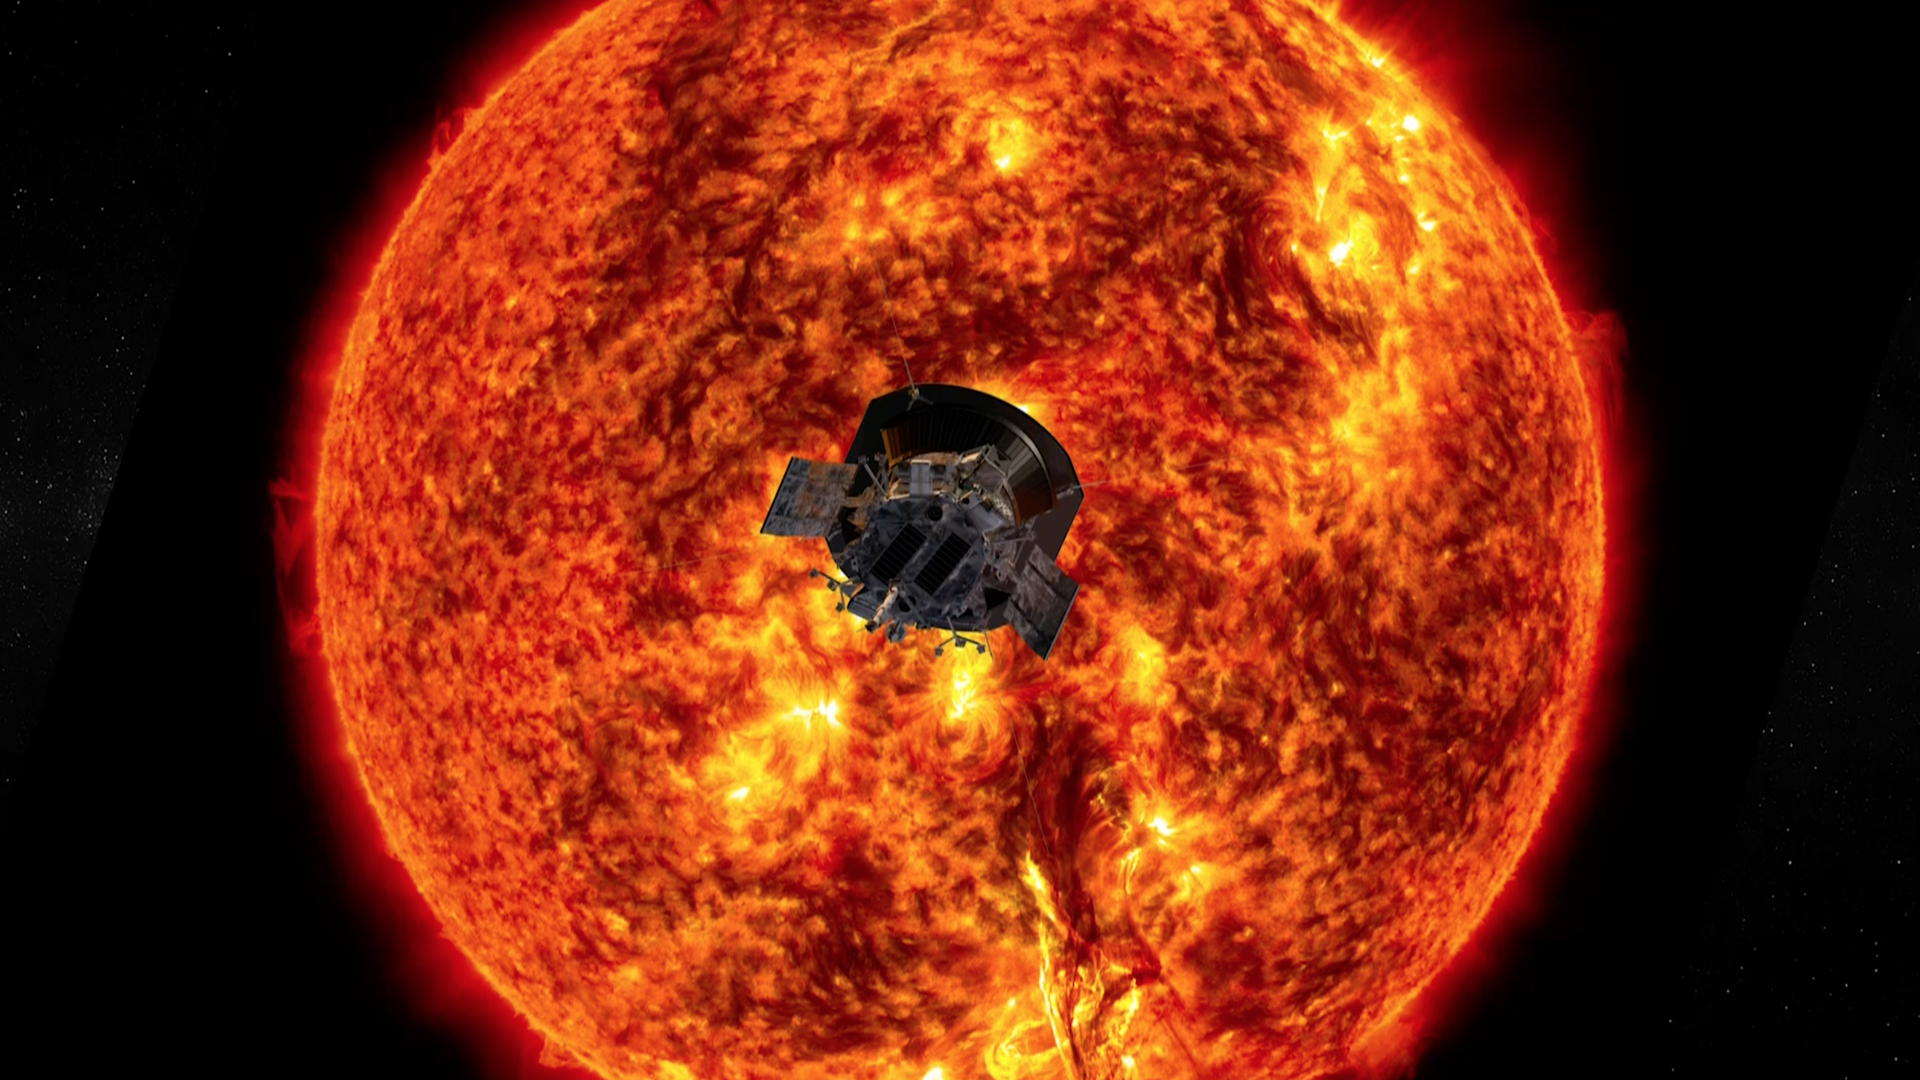 Illustration of the Parker Solar Probe in front of the Sun